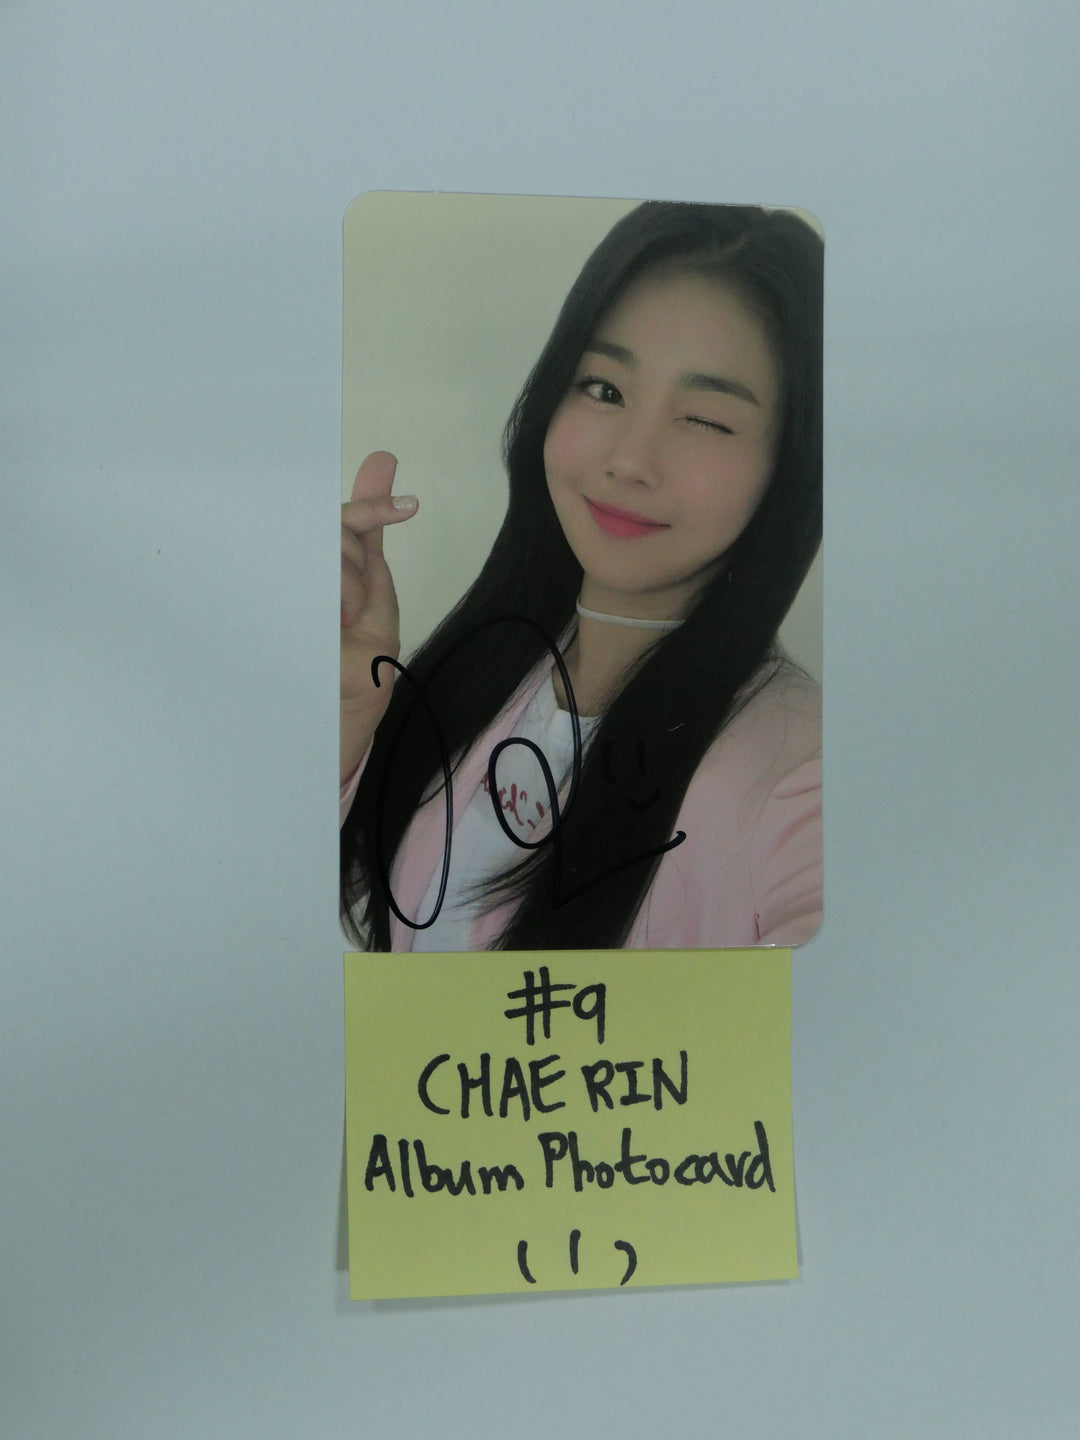 Cherry Bullet - Fansign Winner Event Hand Autograpted (Sign) & Album Photocard